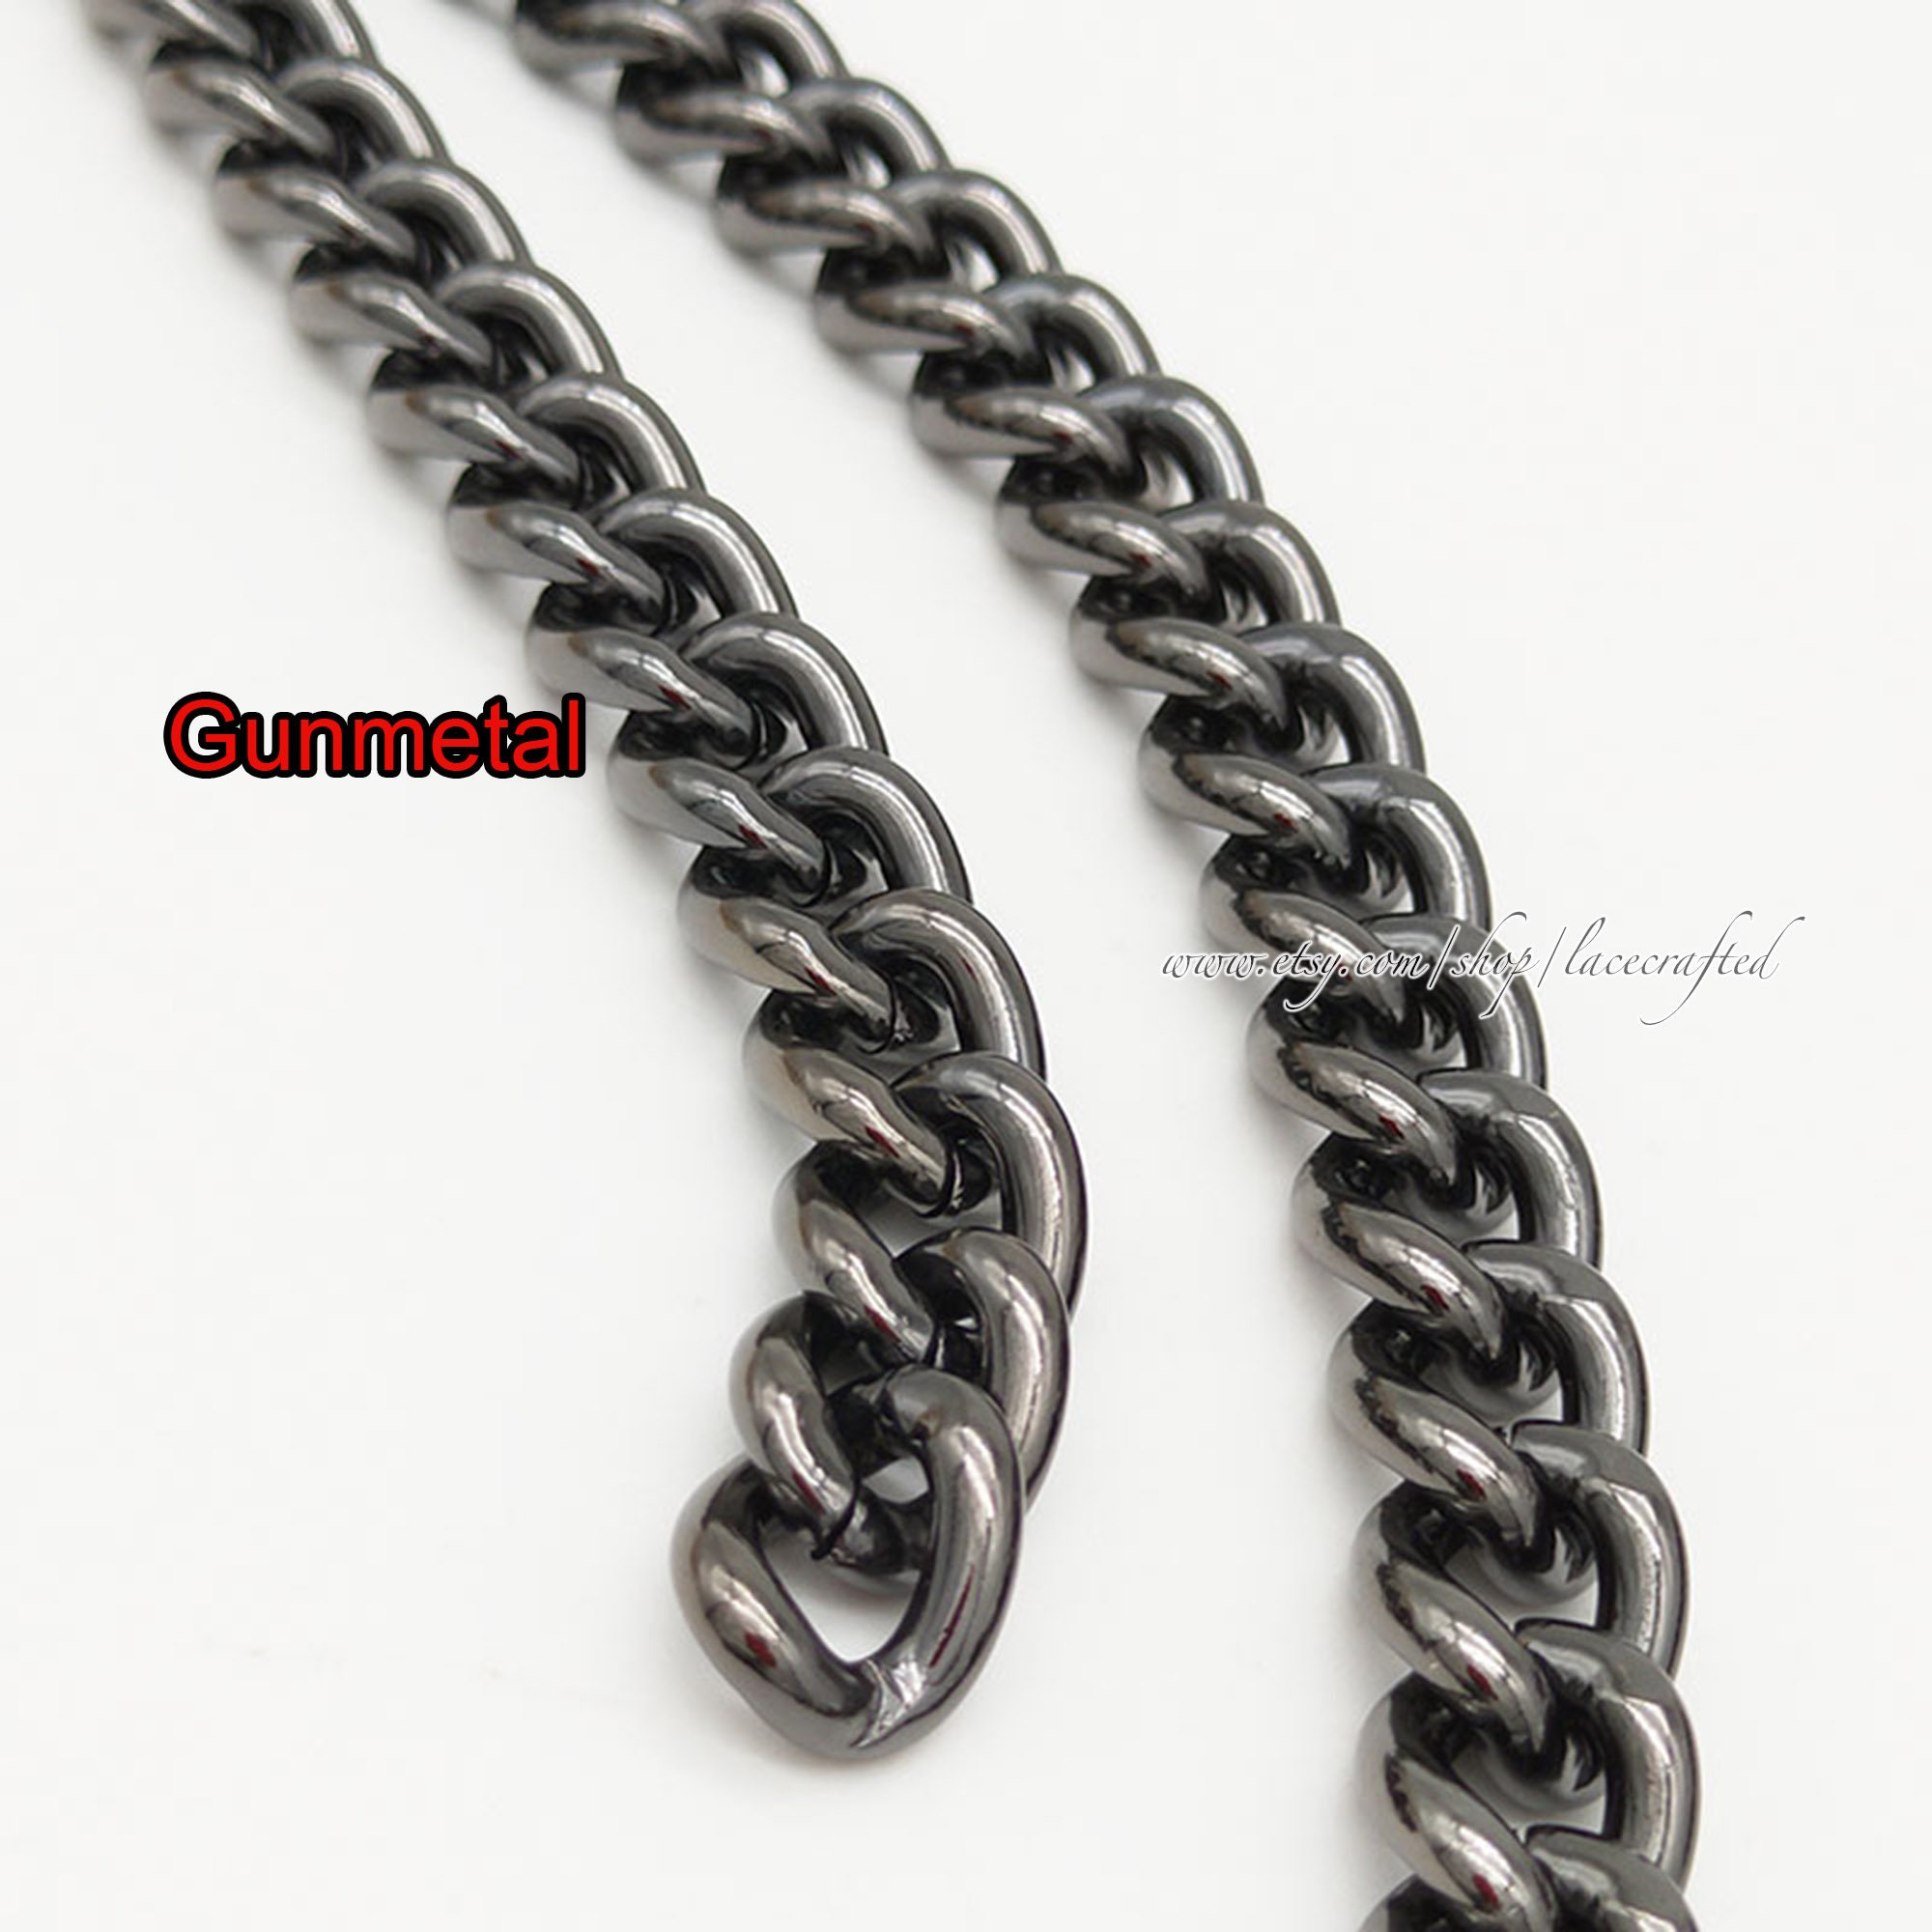 Chain Purse Strap GUNMETAL 51 inches total length - My PunkBroidery